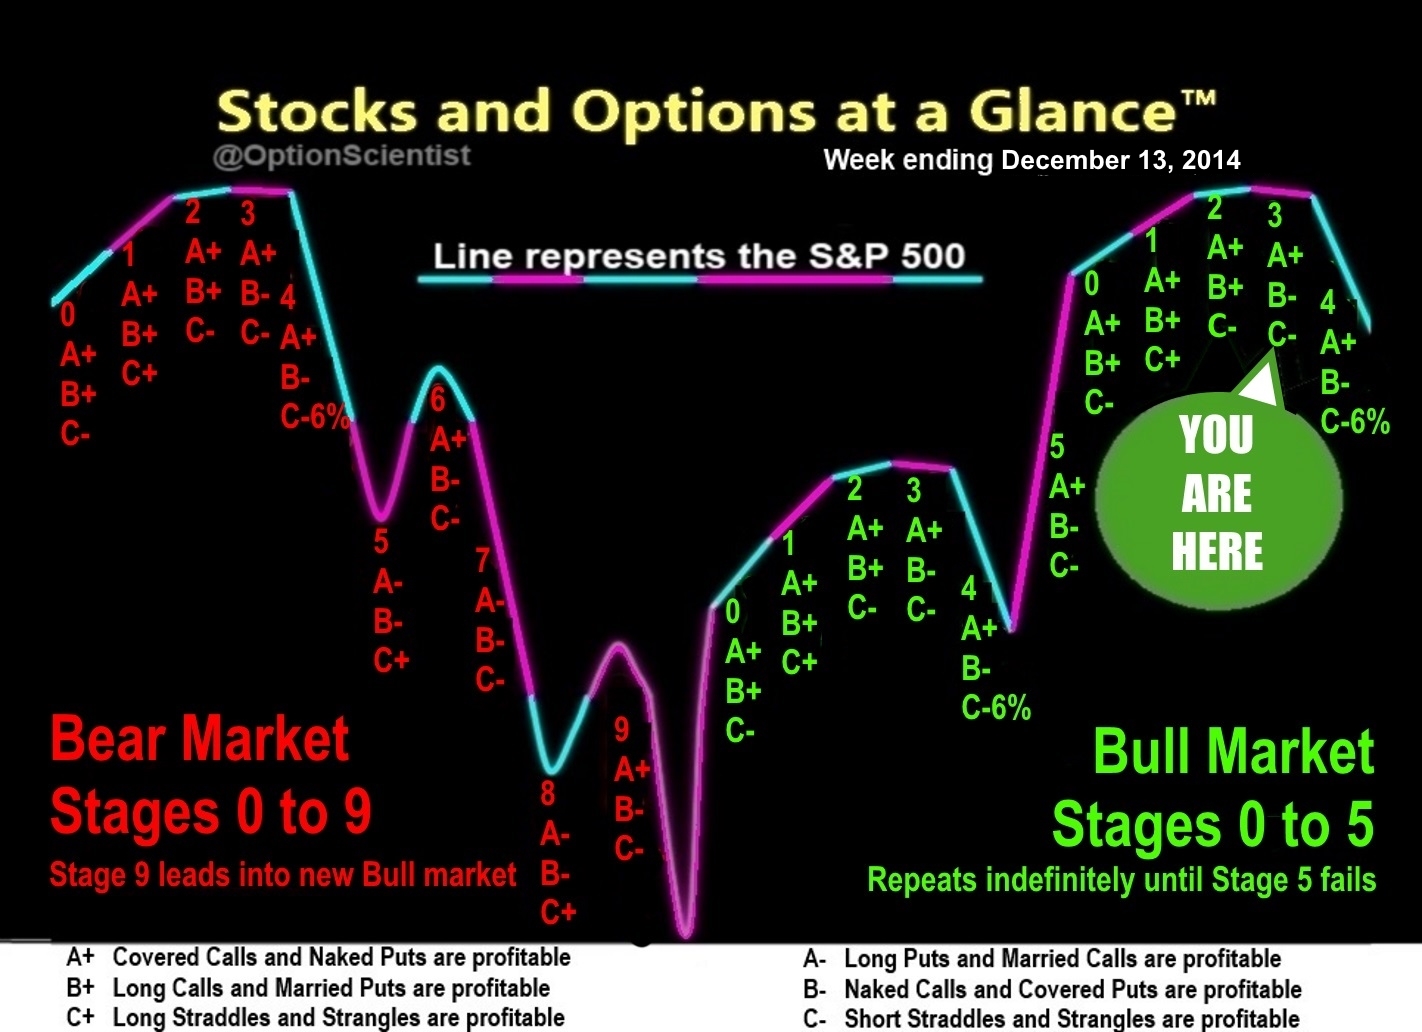 Stocks and Options at a Glance 12-13-14